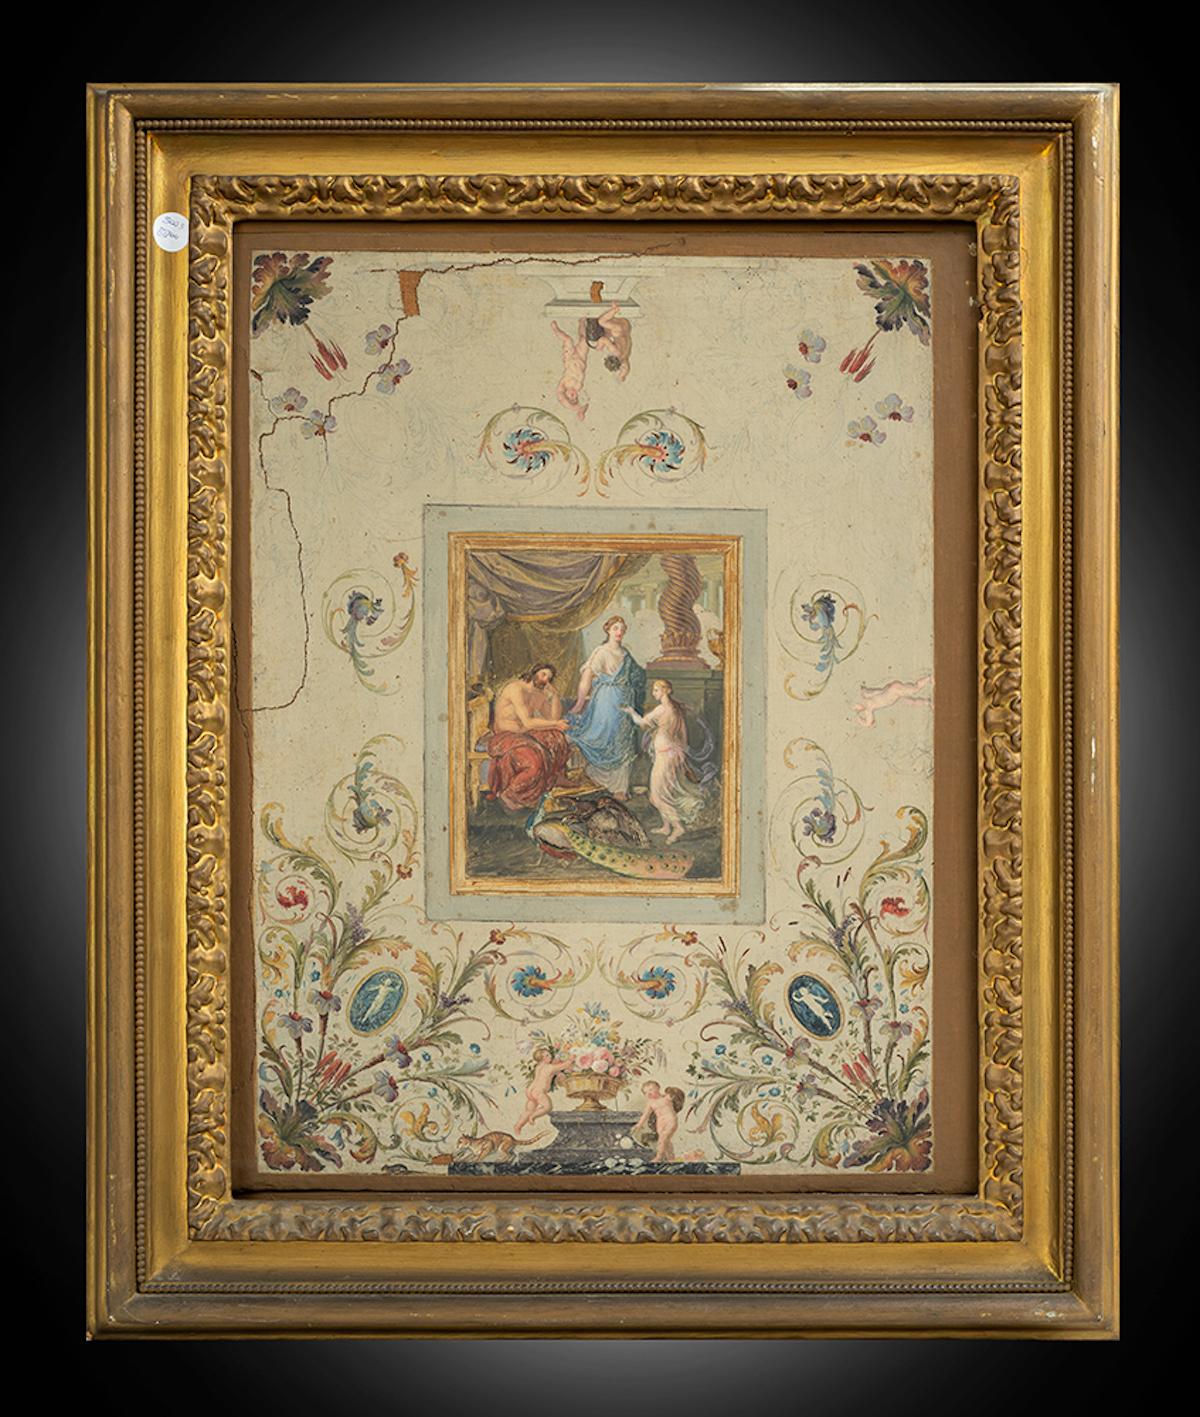 Unknown Figurative Painting - Antique oil on canvas painting depicting neoclassical scene